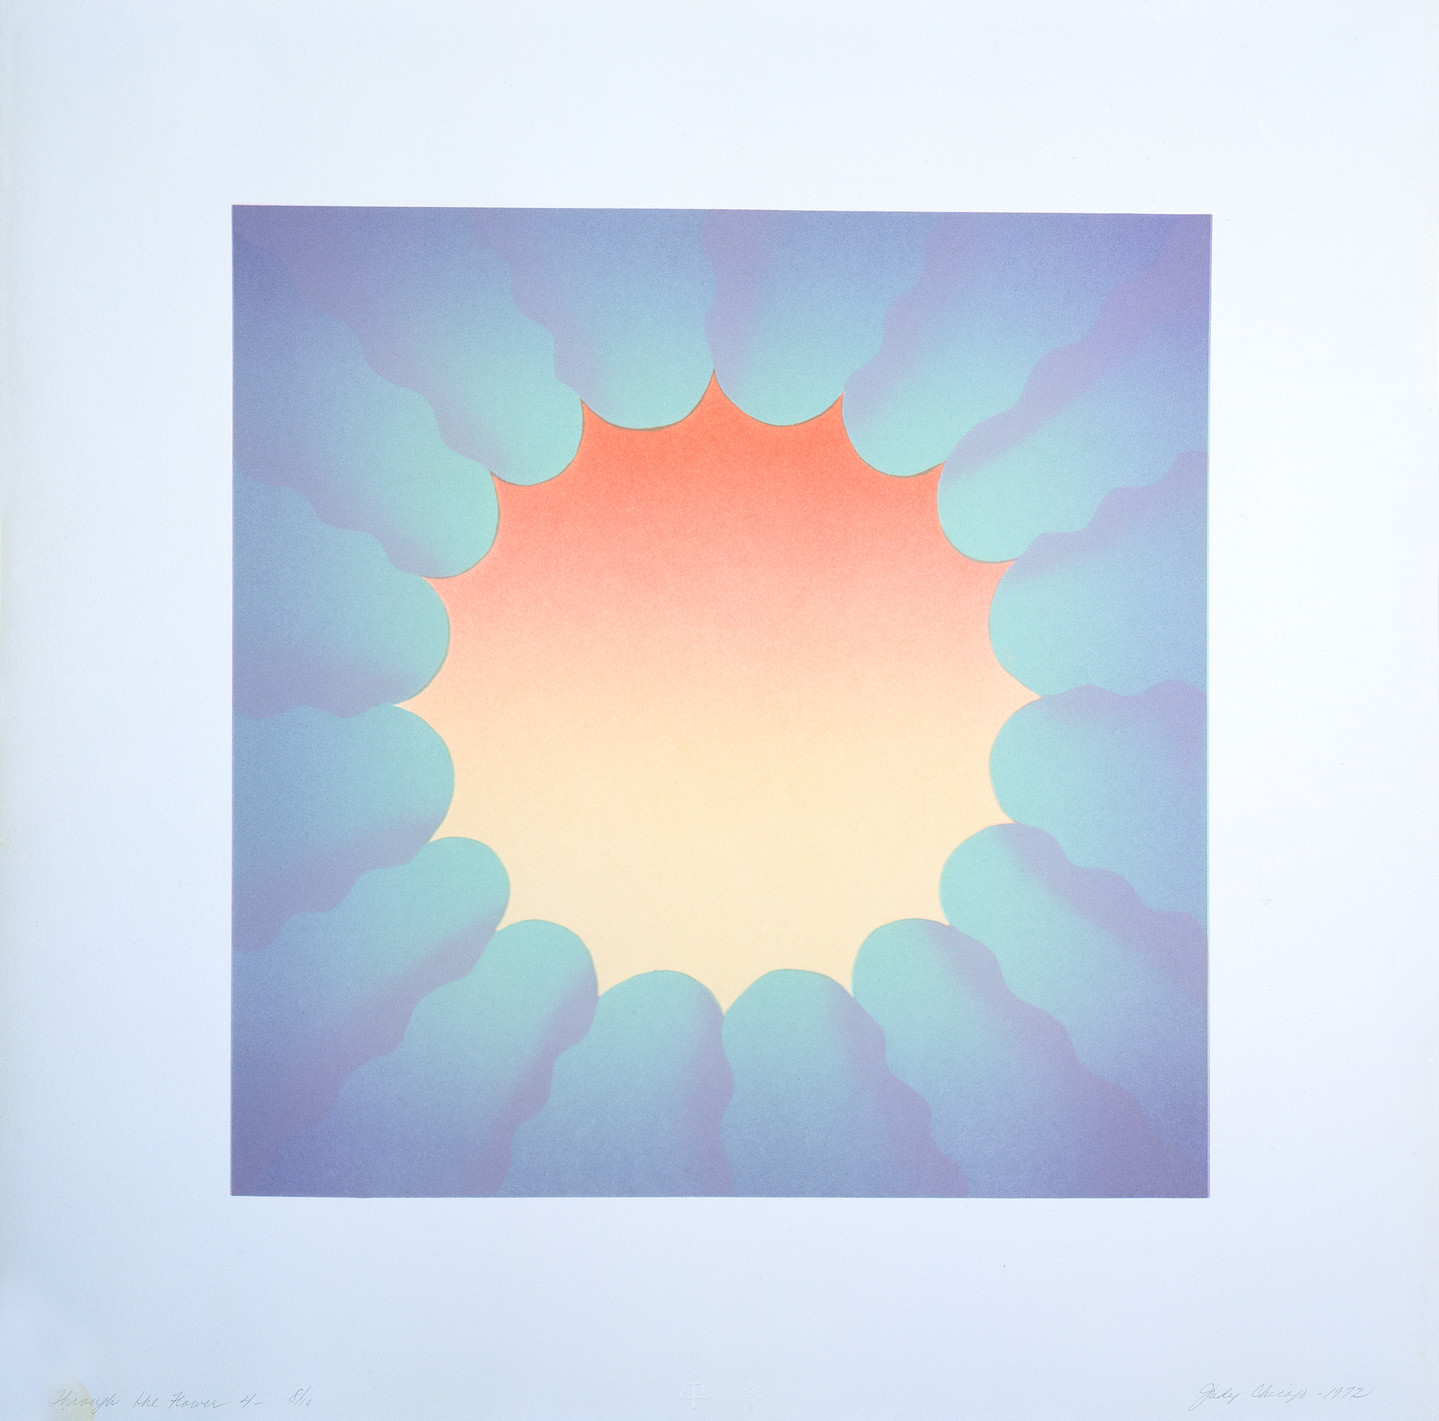 A square-shaped abstract image with a ring of pale purple rounded forms with wavy sides surrounding a sun shaped center that fades from coral at the top to a pale peach at the bottom.